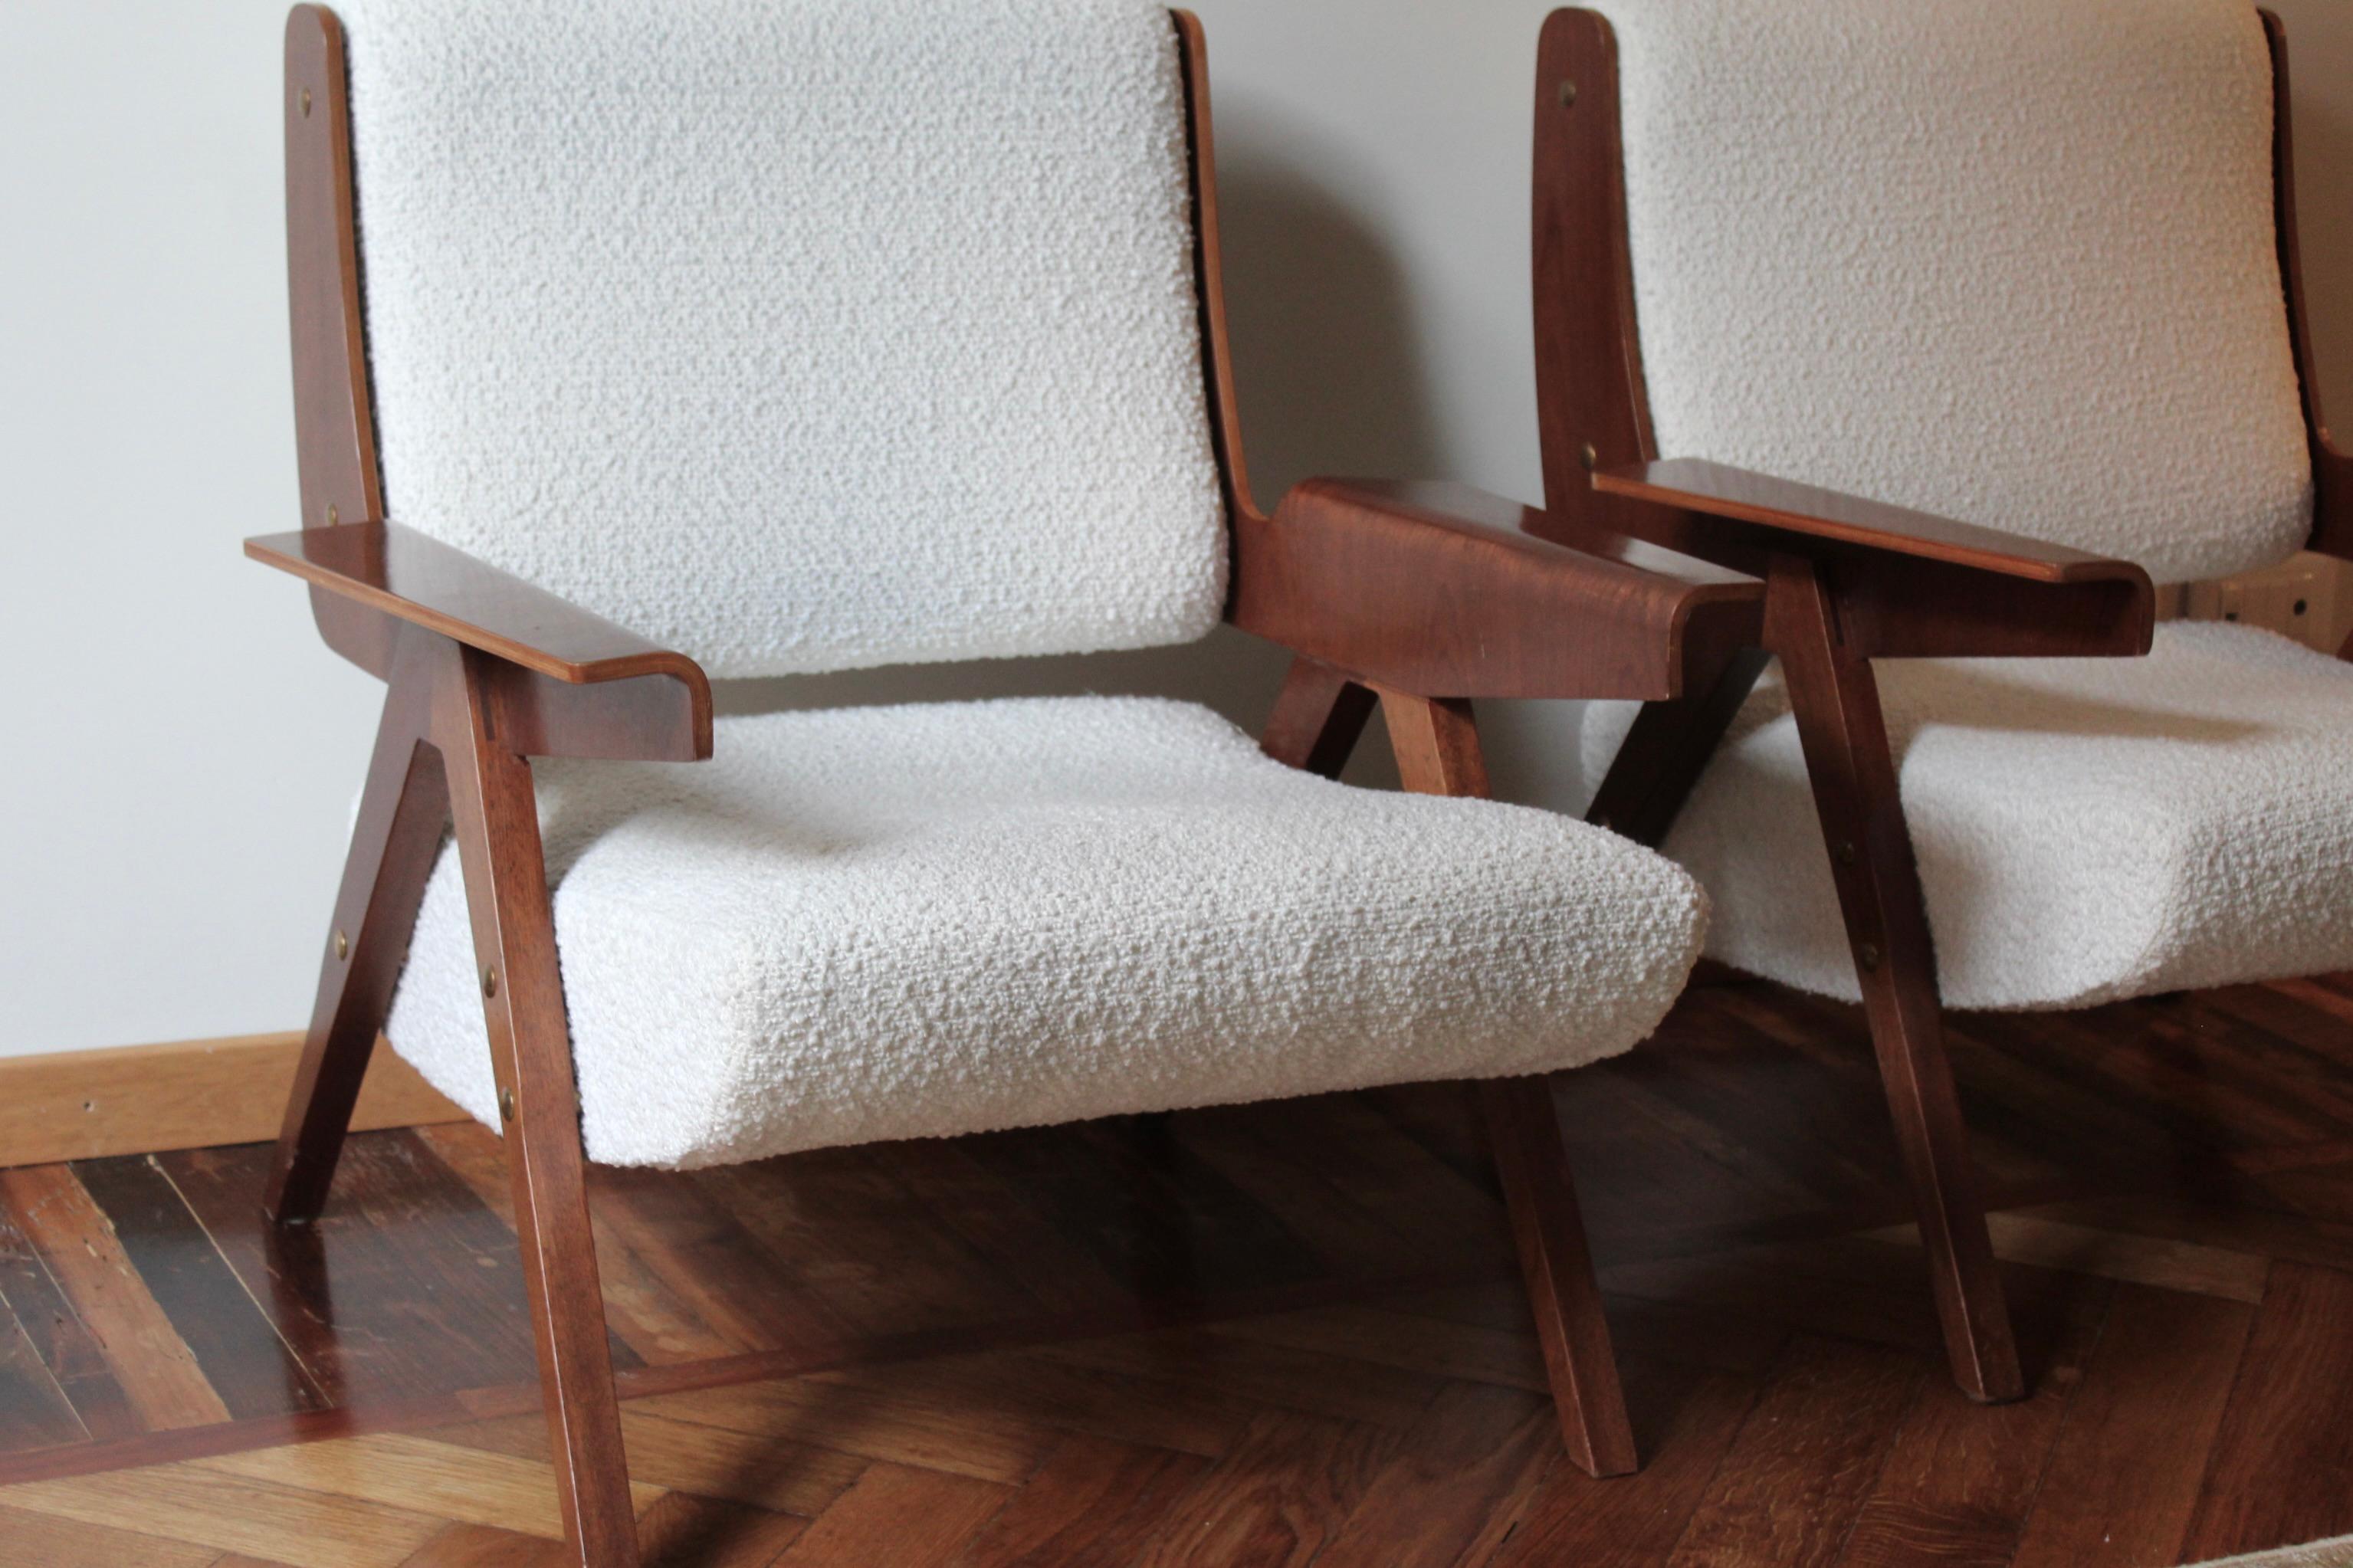 Mid-20th Century Gianfranco Frattini, Lounge Chairs Plywood, White Fabric, Cassina Italy, C. 1955 For Sale